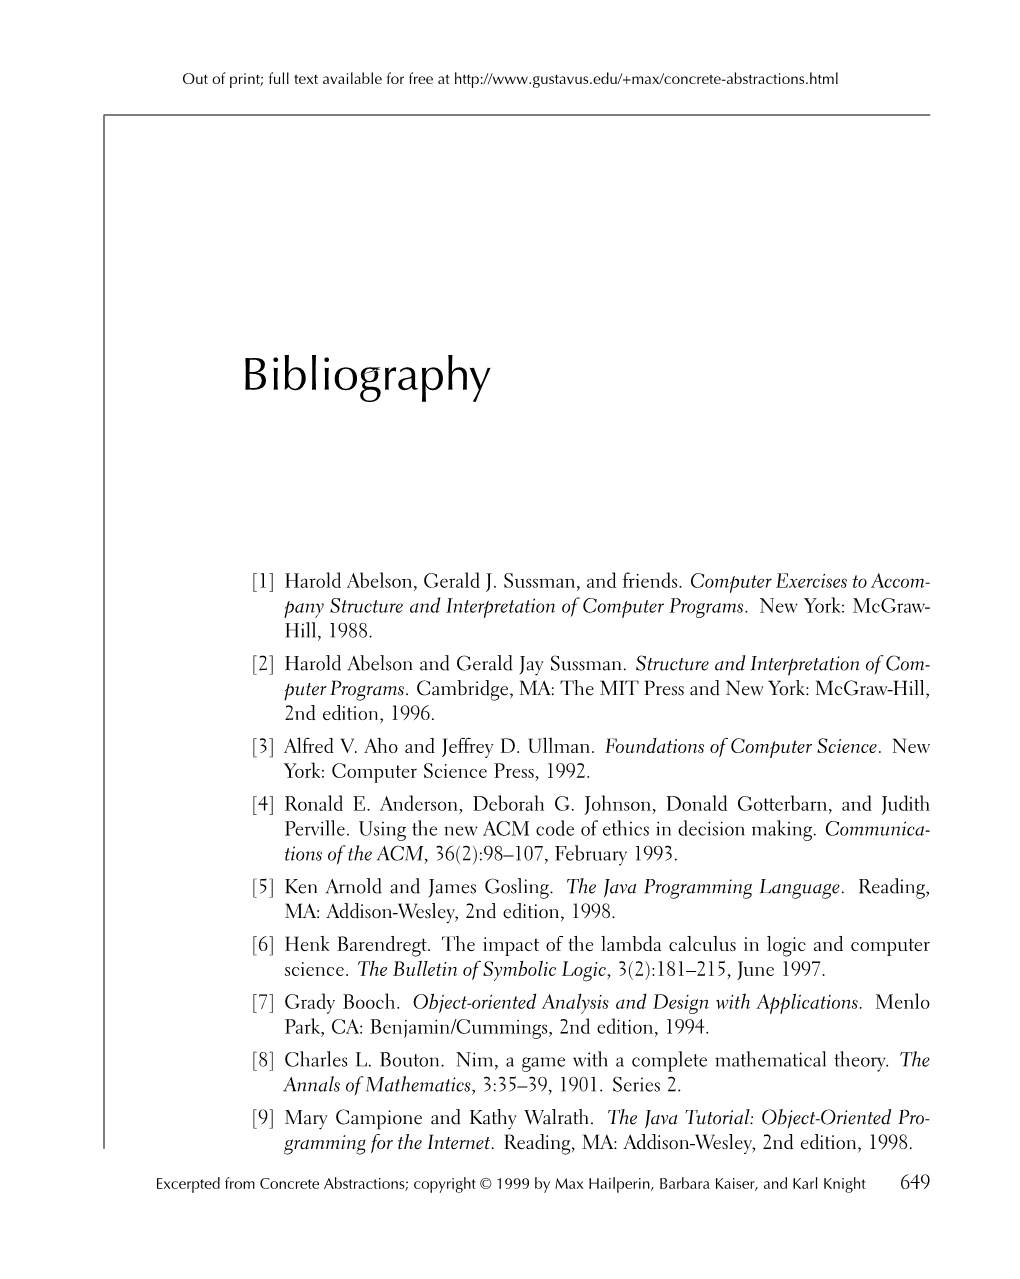 Bibliography of Concrete Abstractions: an Introduction To